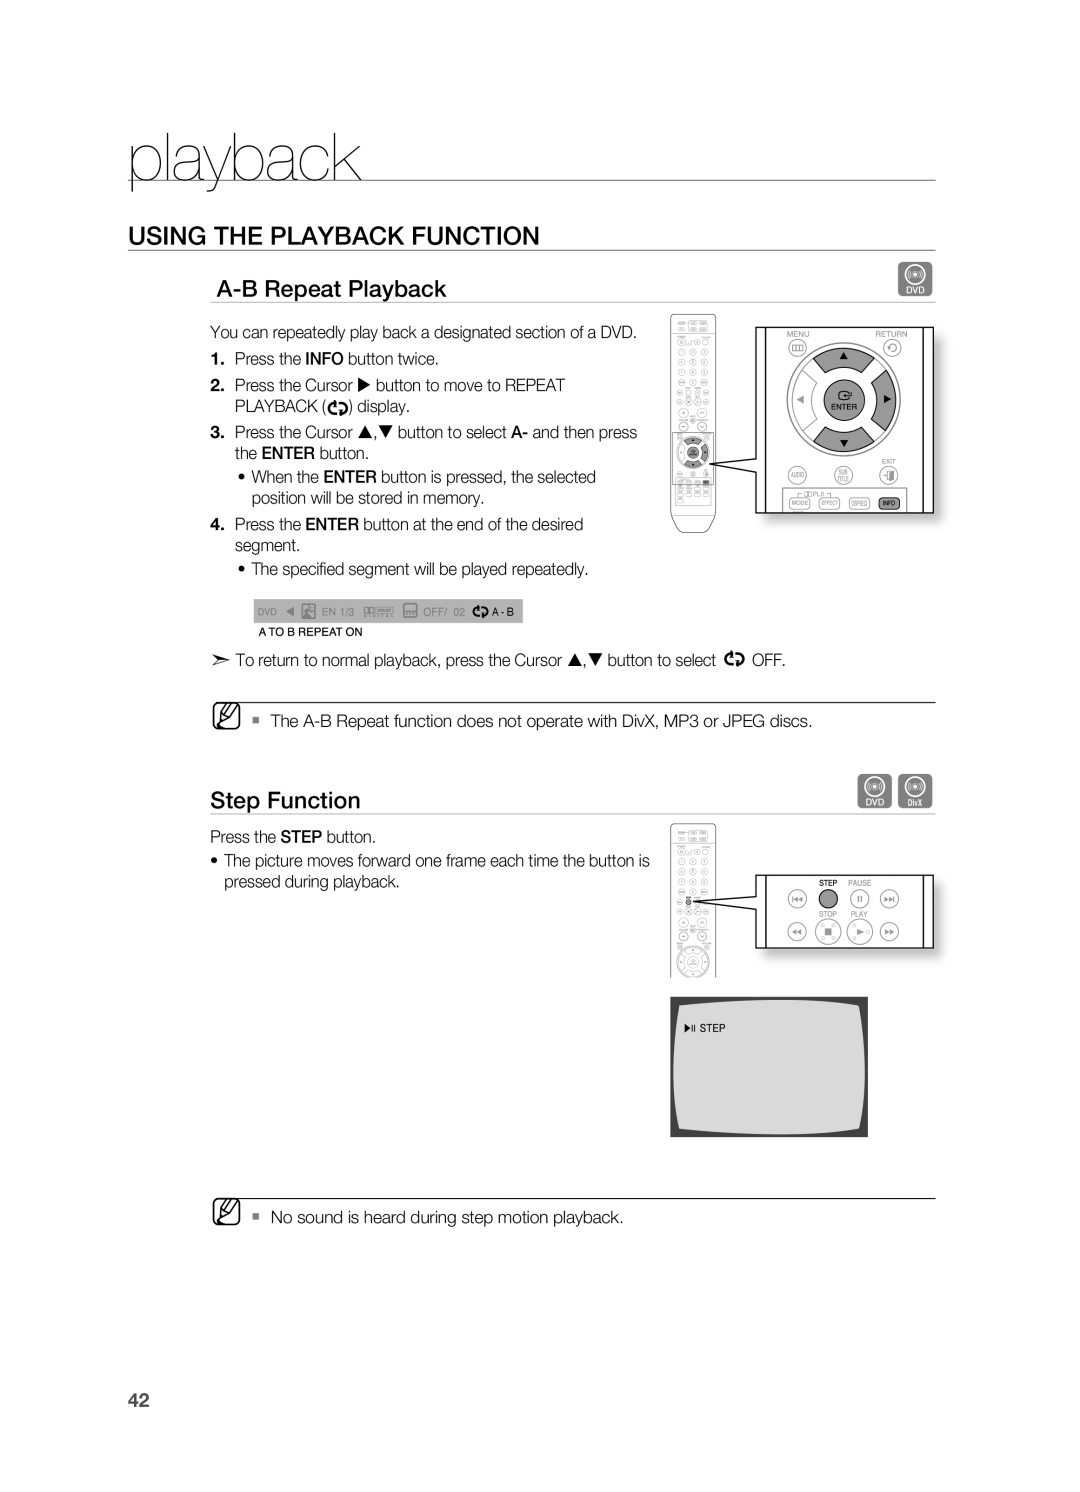 Samsung HT-TZ312 manual a-Brepeat Playback, Step function, playback, USinG tHE PLayBaCK fUnCtiOn 